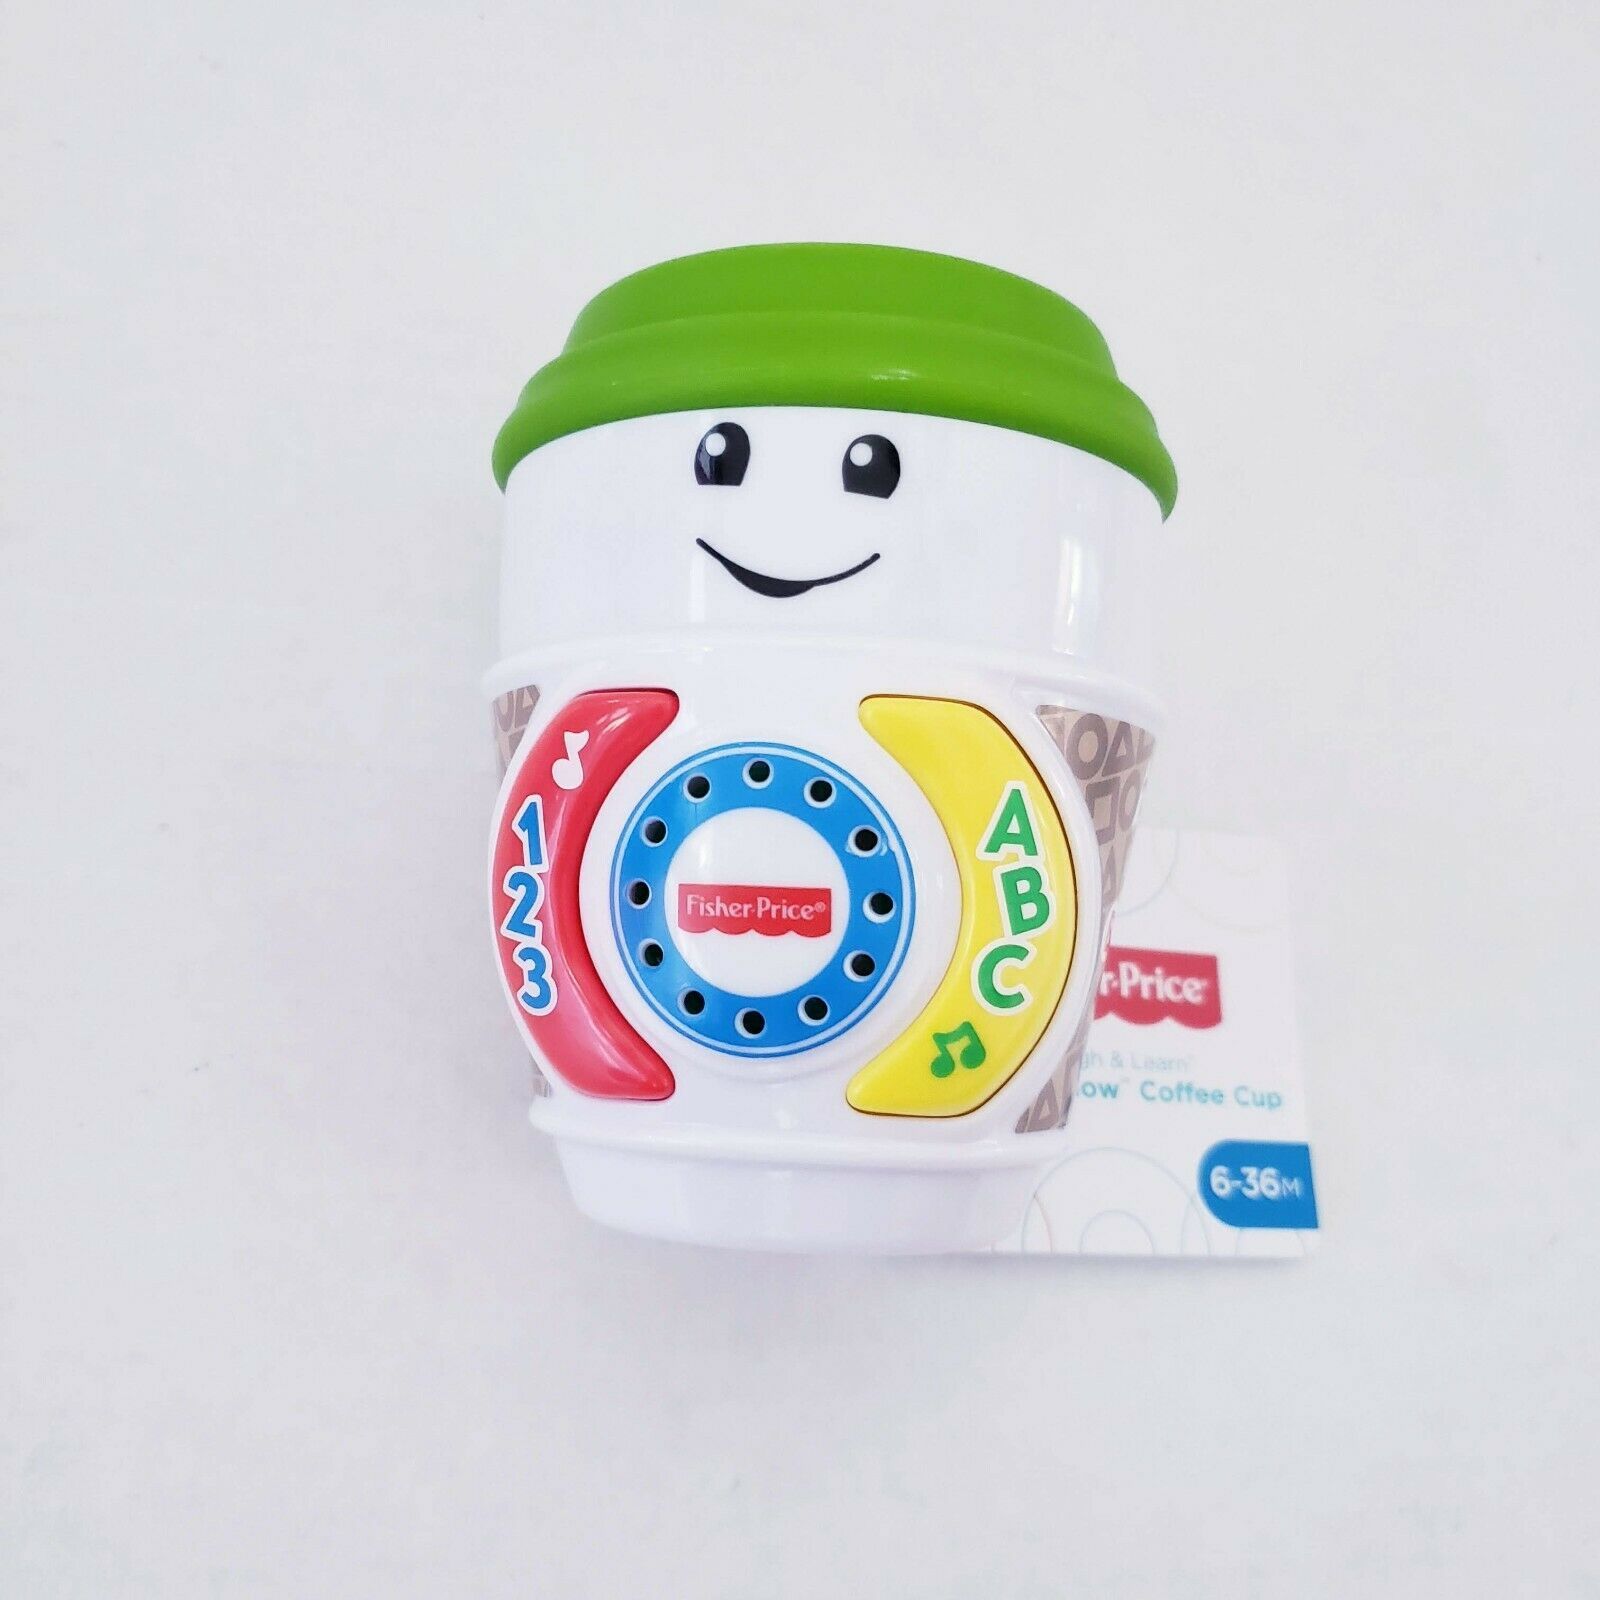 Primary image for Fischer Price Baby Coffee Cup Lights & Sounds Learning Toy